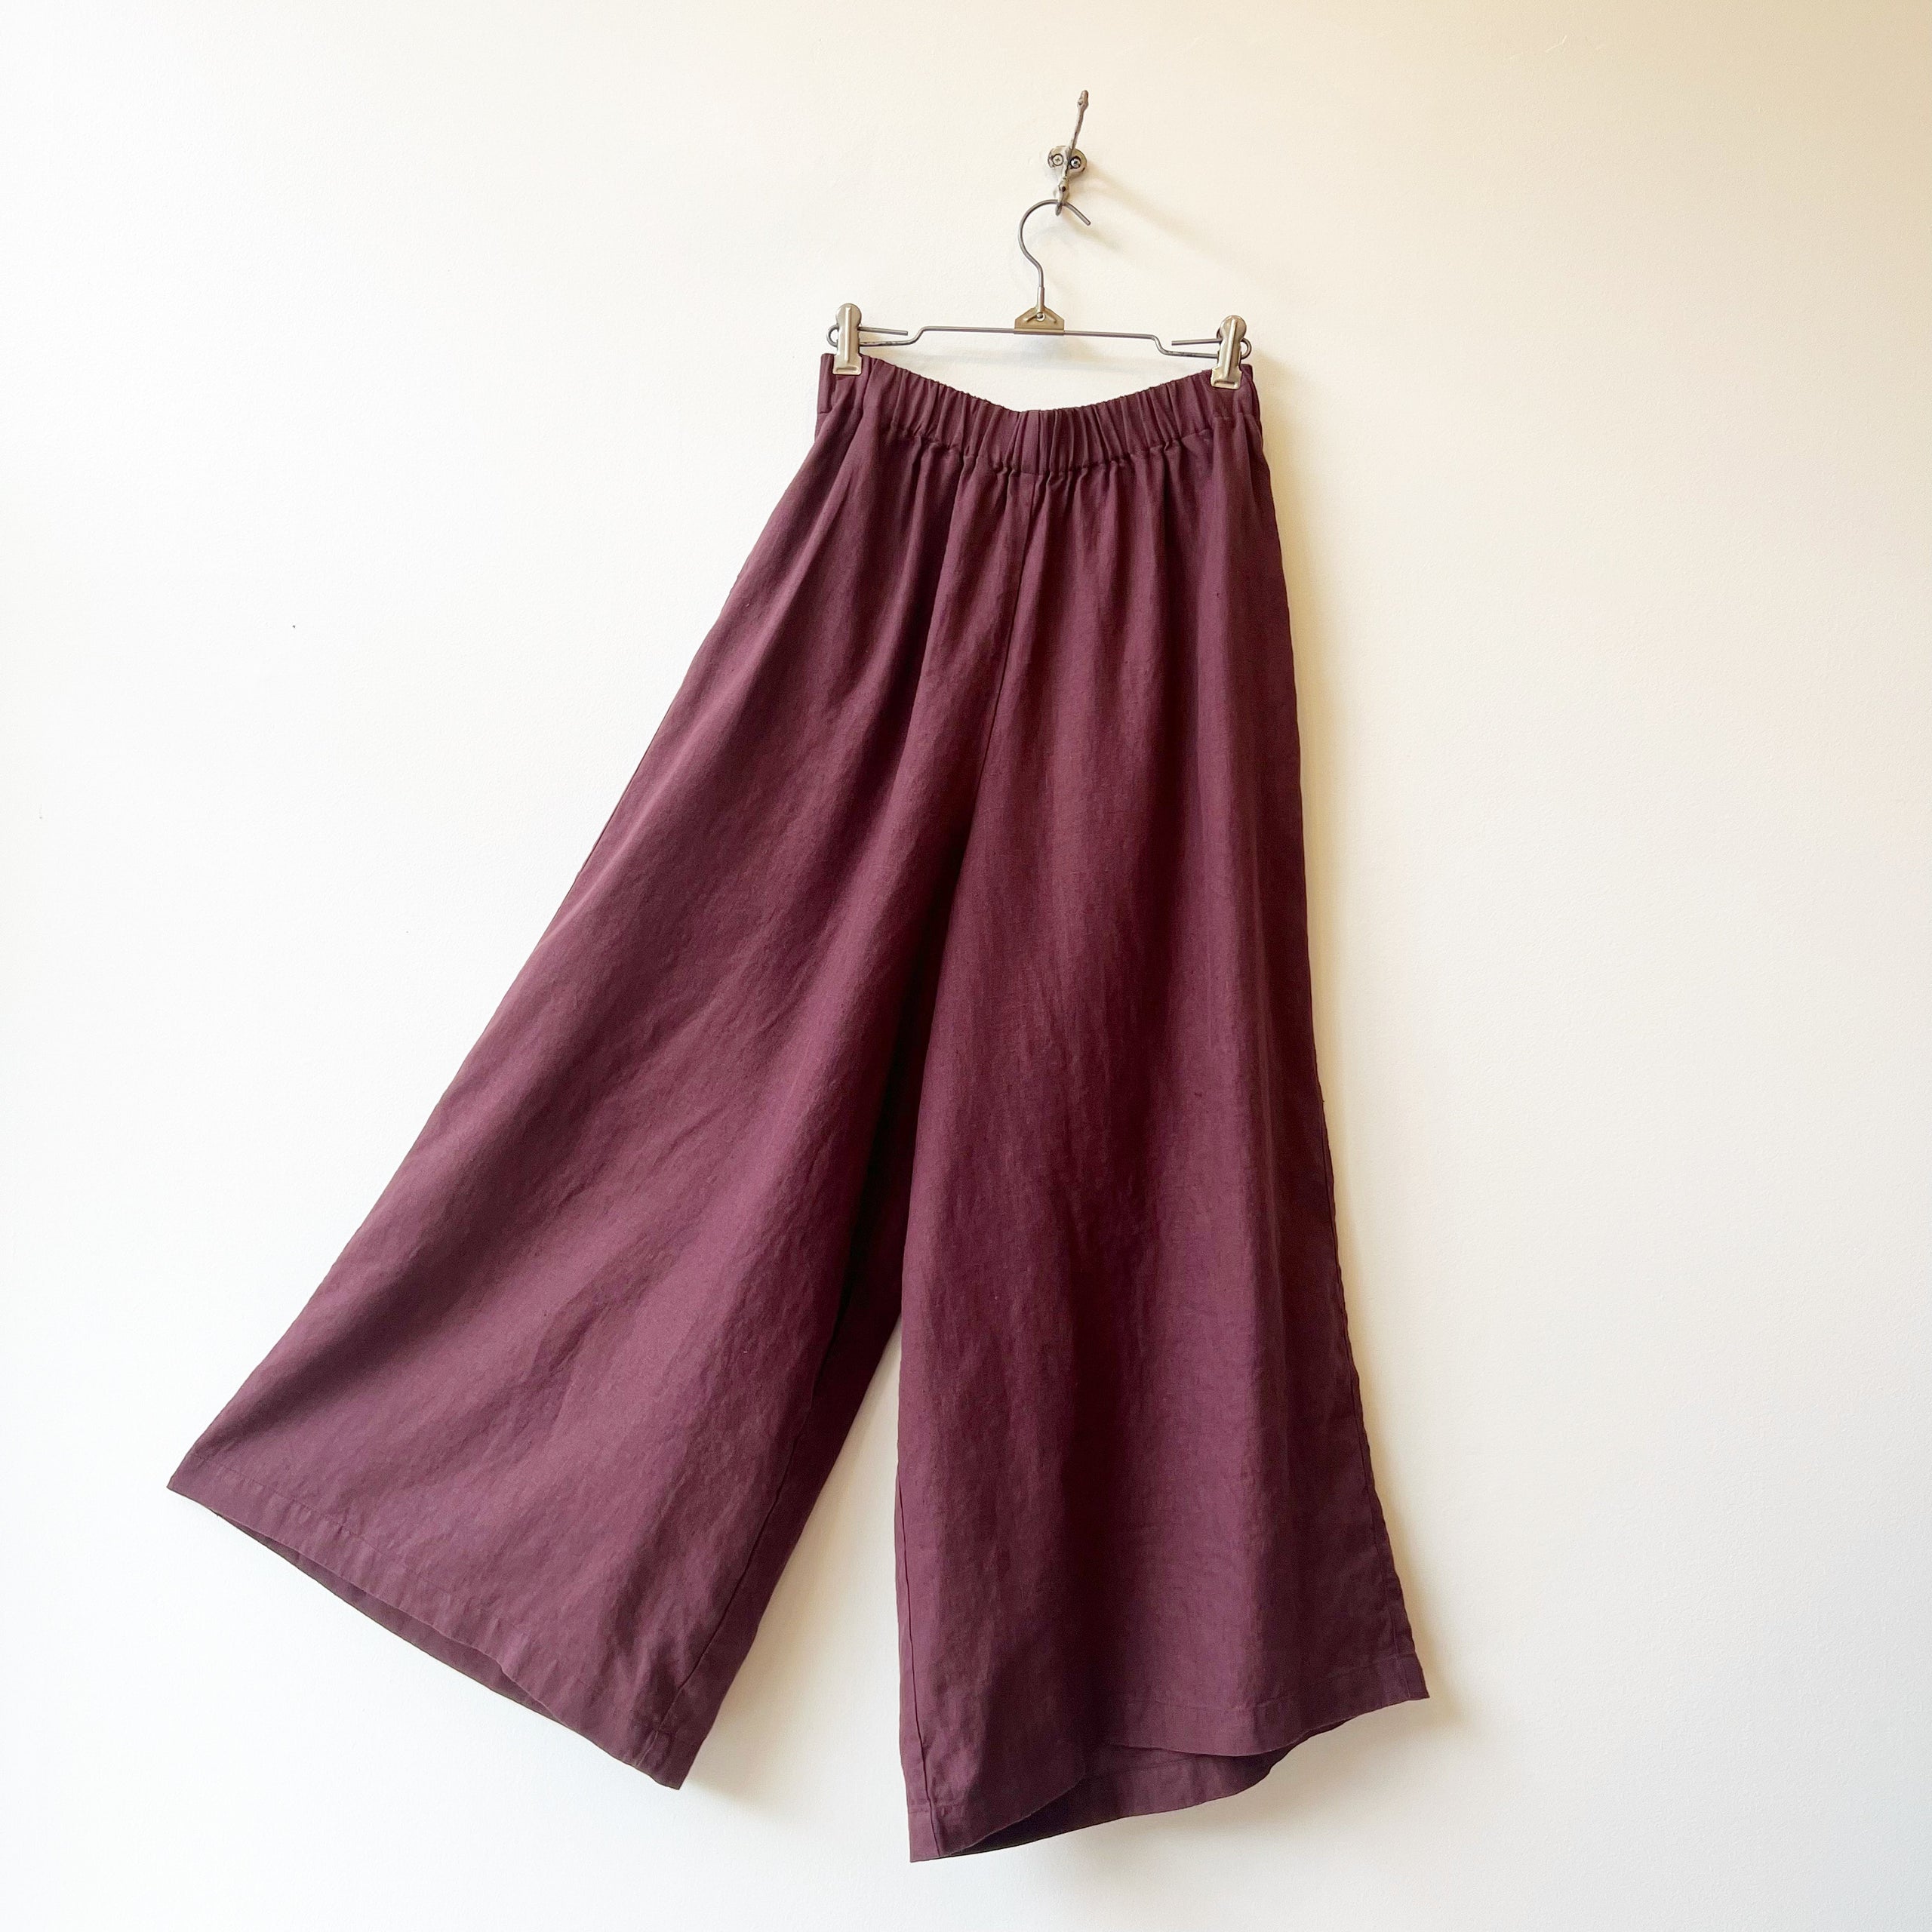 Linen pants Palazzo 28 inches inseam